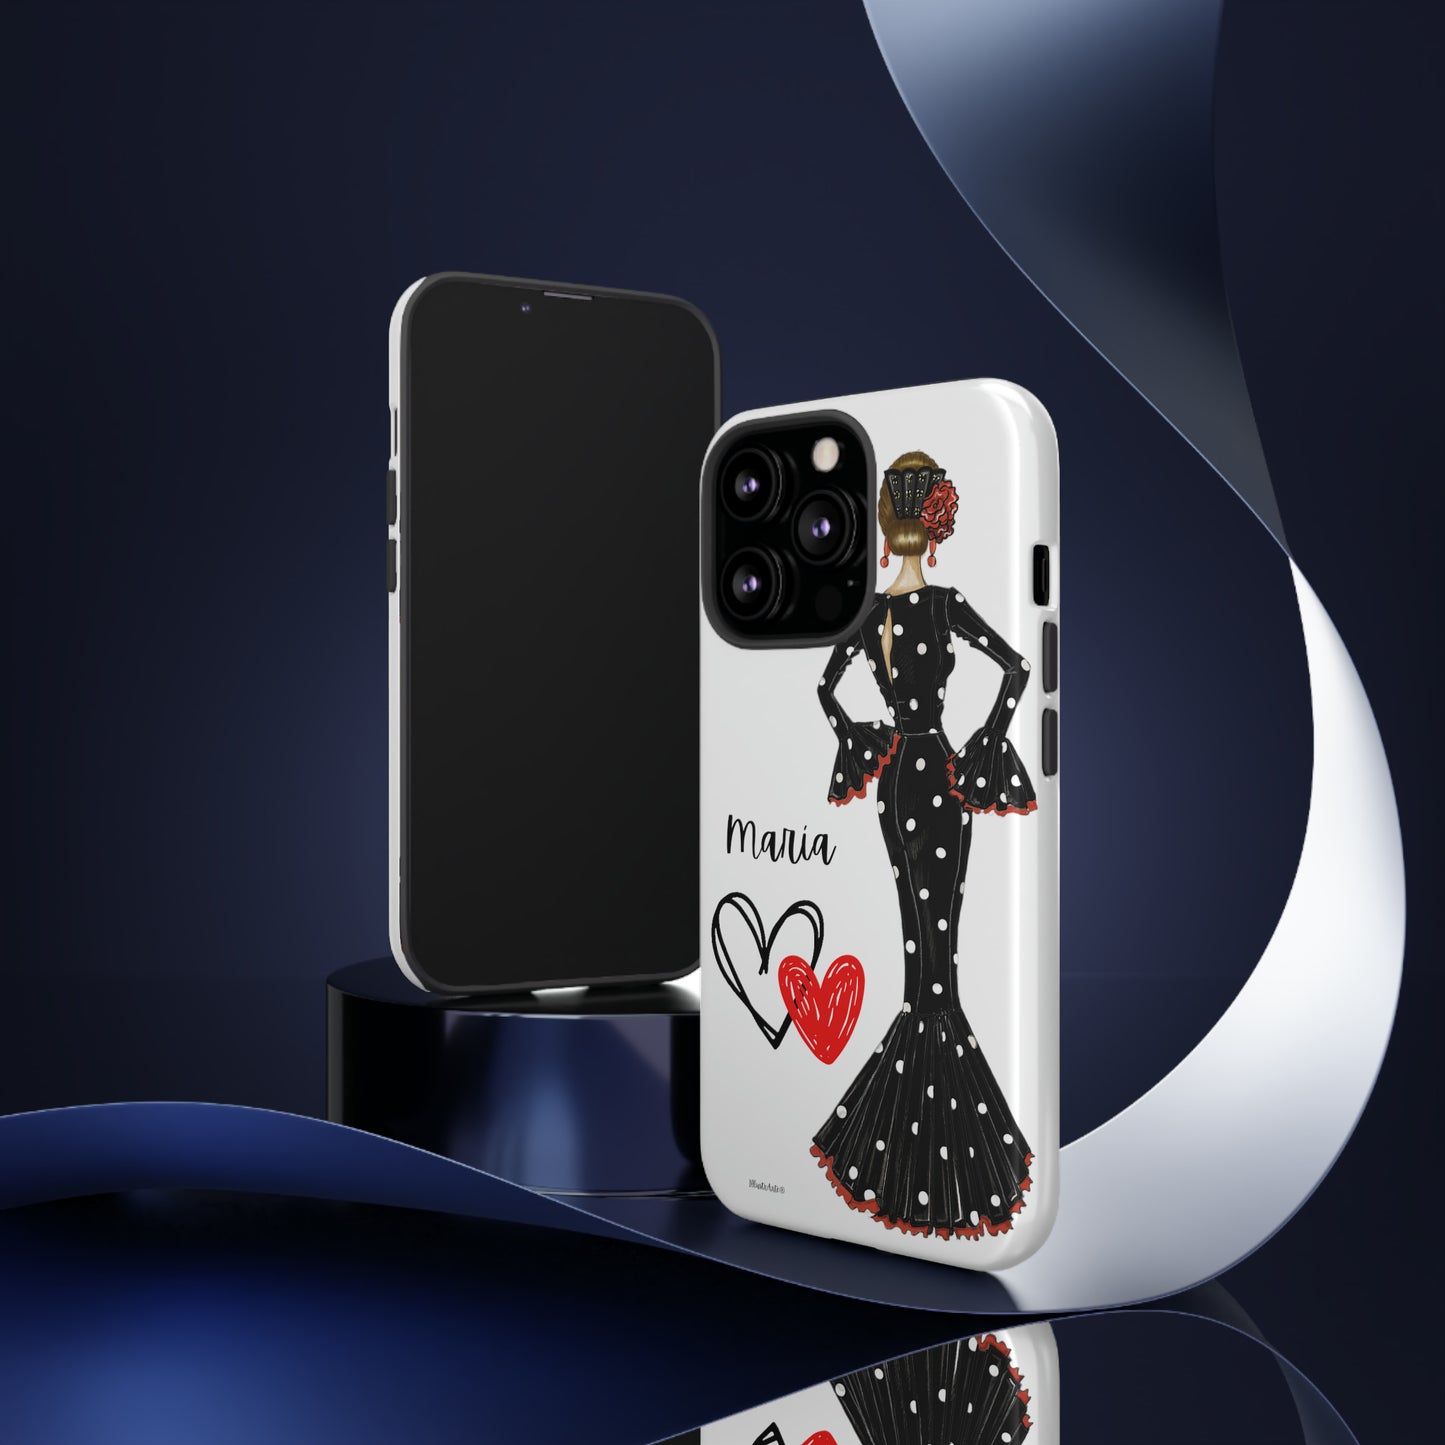 a phone case with a woman in a polka dot dress